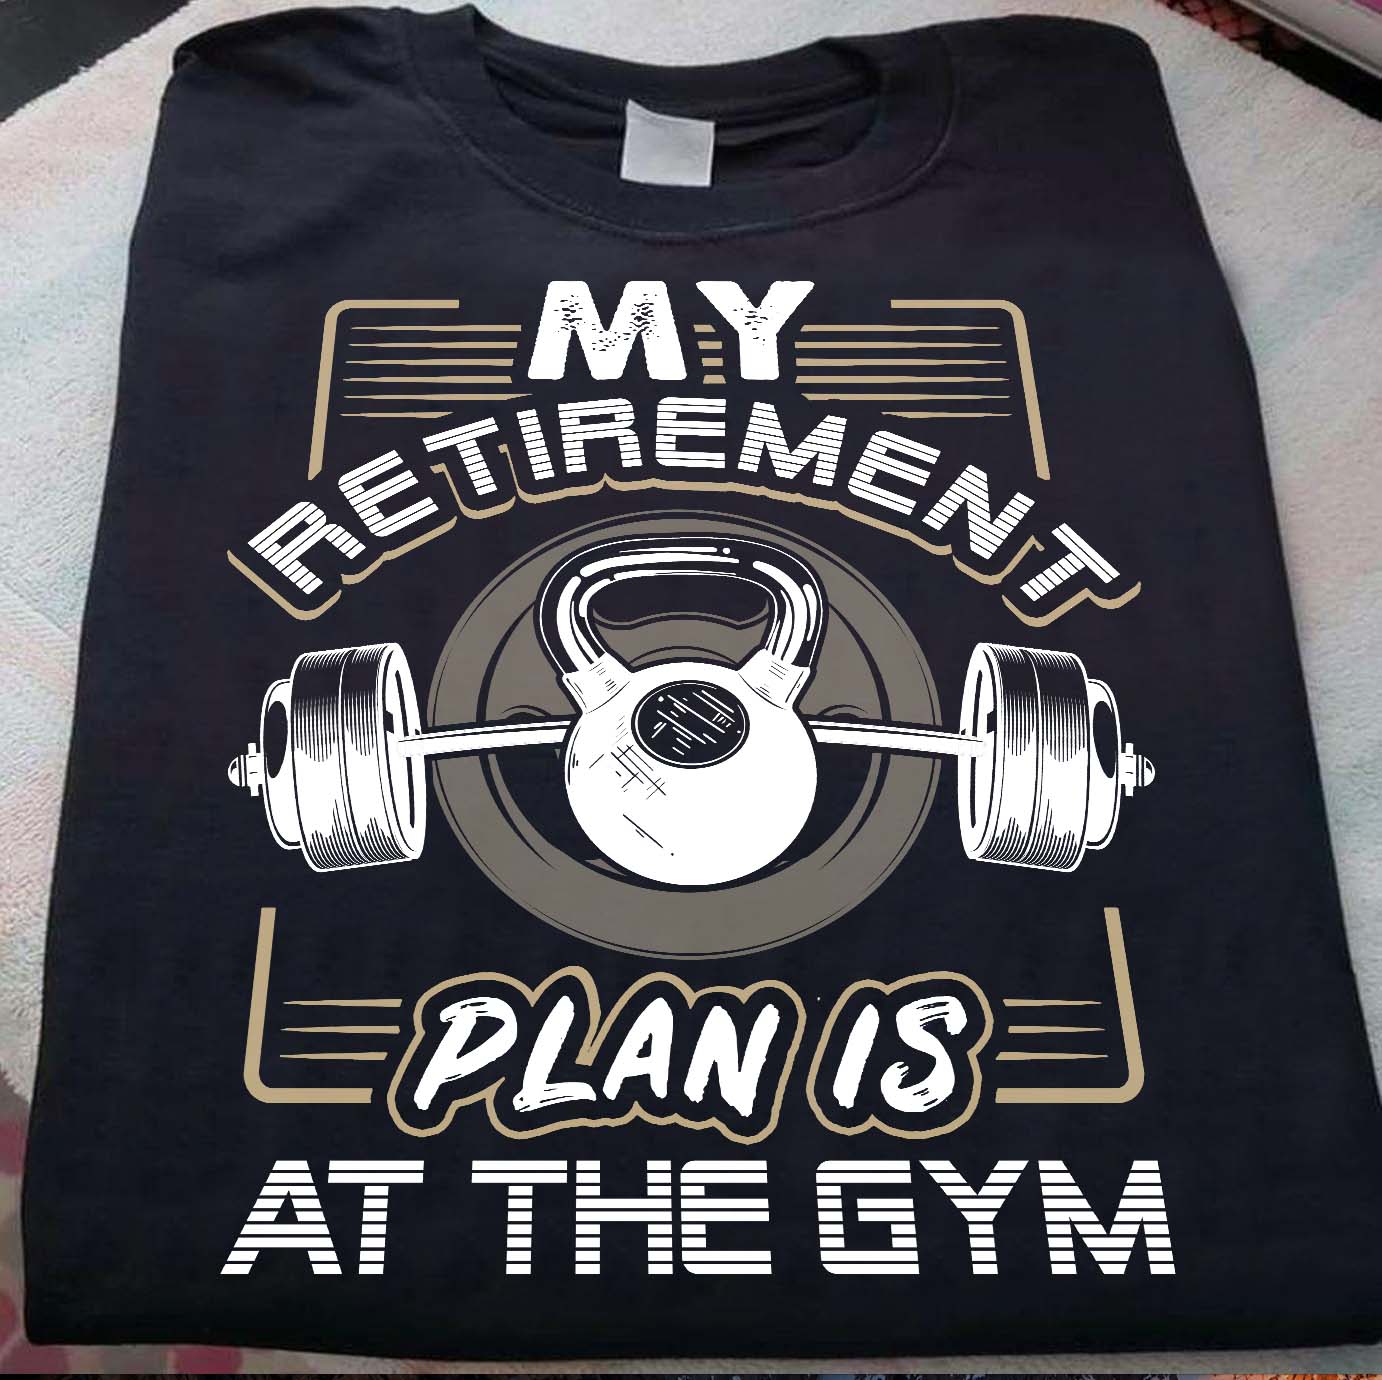 My retirement plan is at the gym - The dumbbell, love lifting